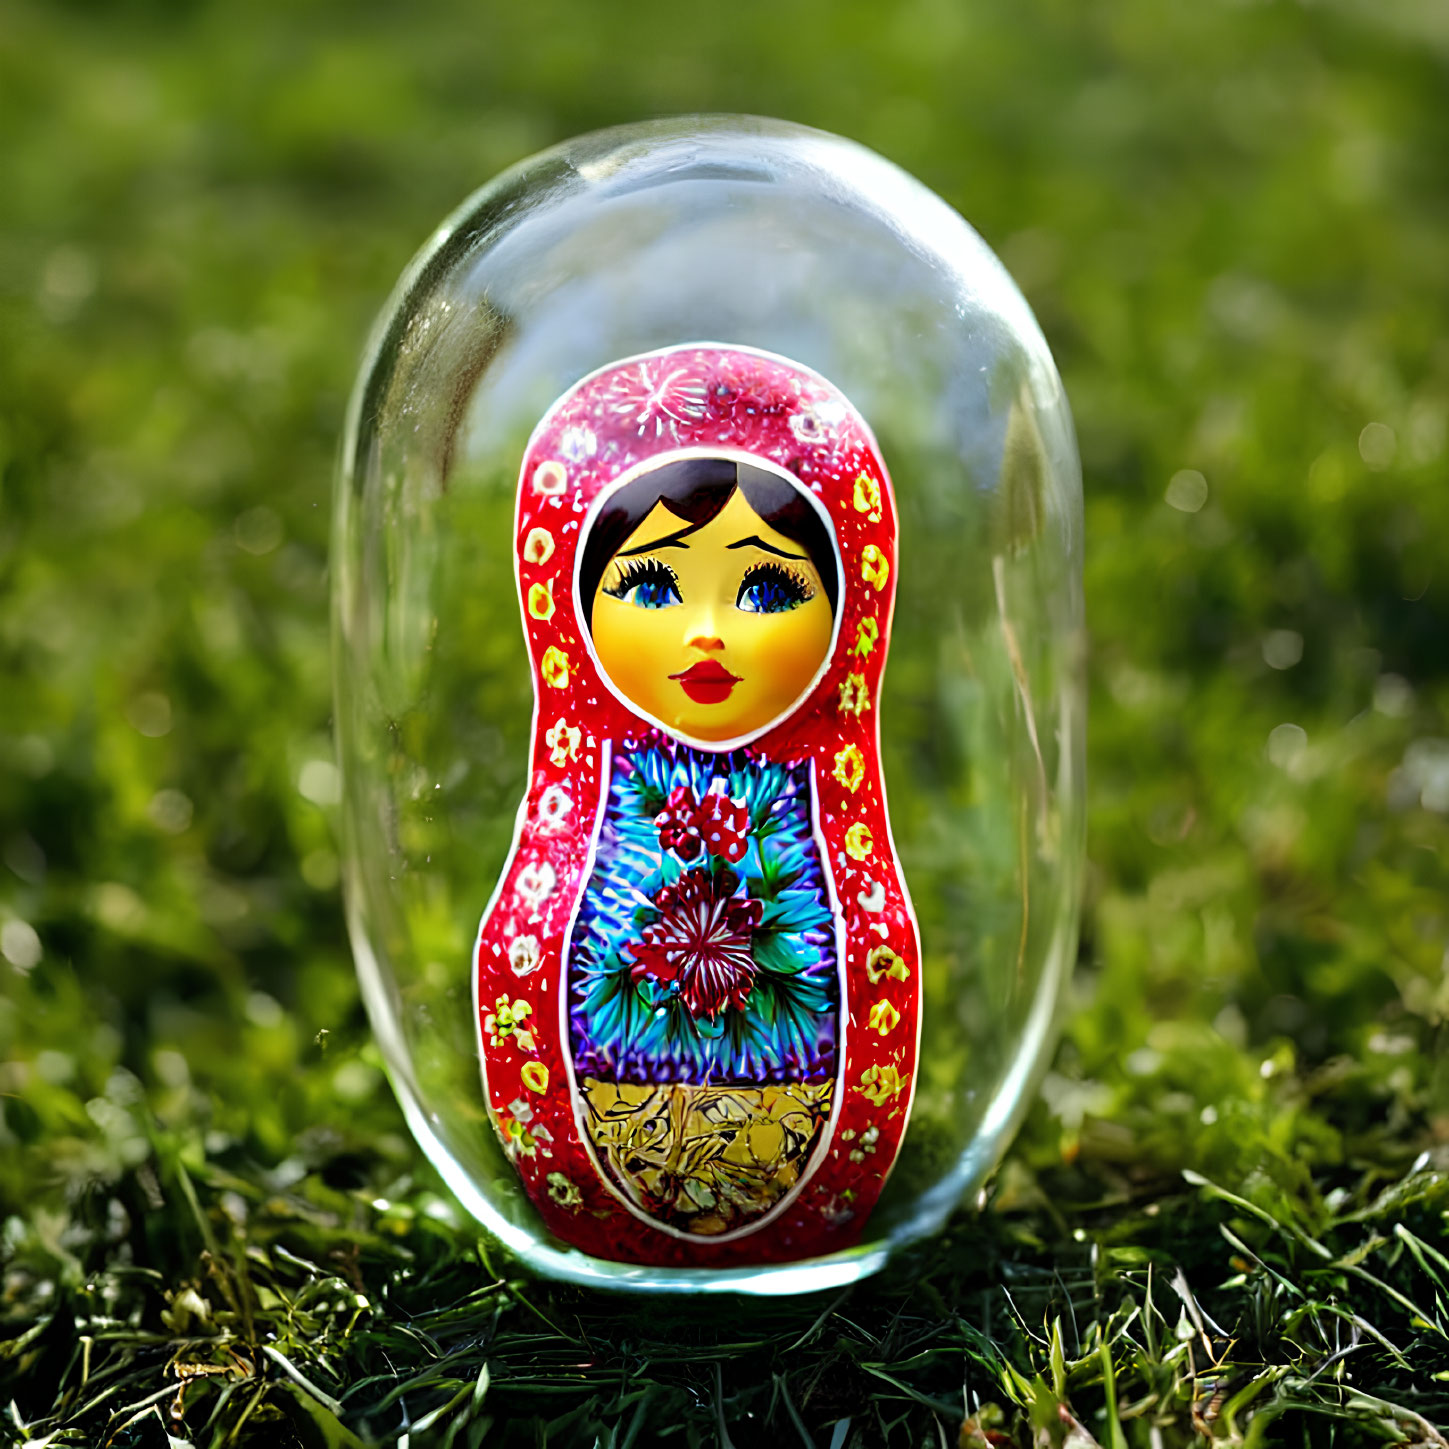 Colorful traditional Russian Matryoshka doll in glass dome on grassy background